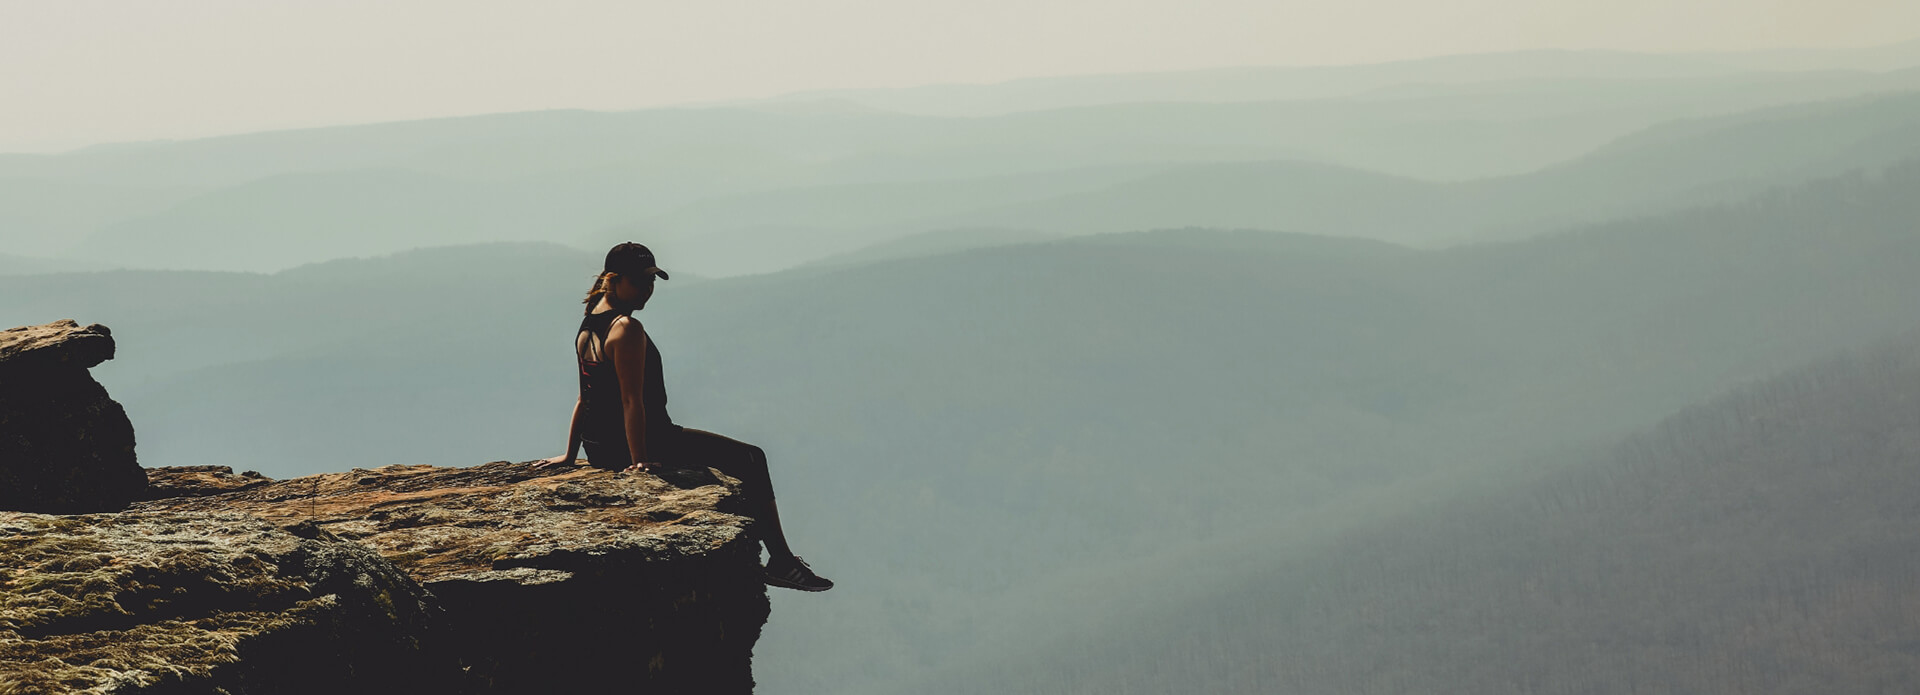 woman sitting on edge of a cliff overlooking the scenery